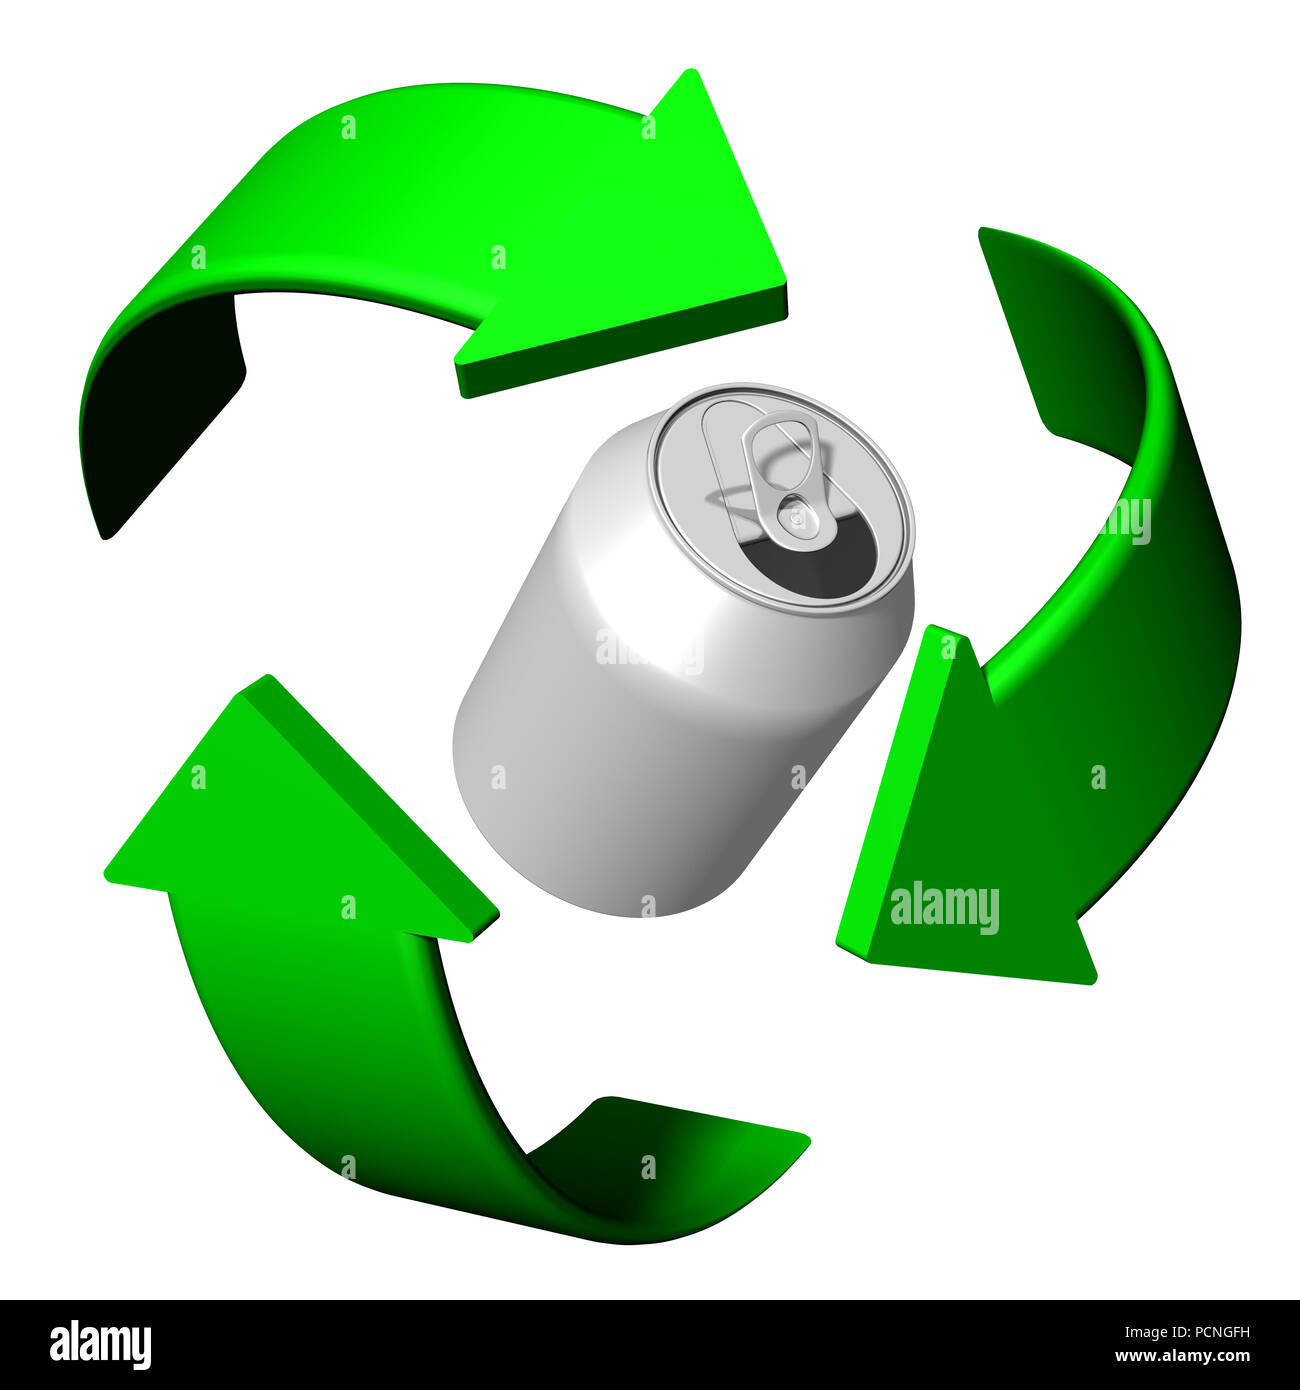 Cans and metal. Recycling symbol.. Ecological cleaner world. Stock Photo